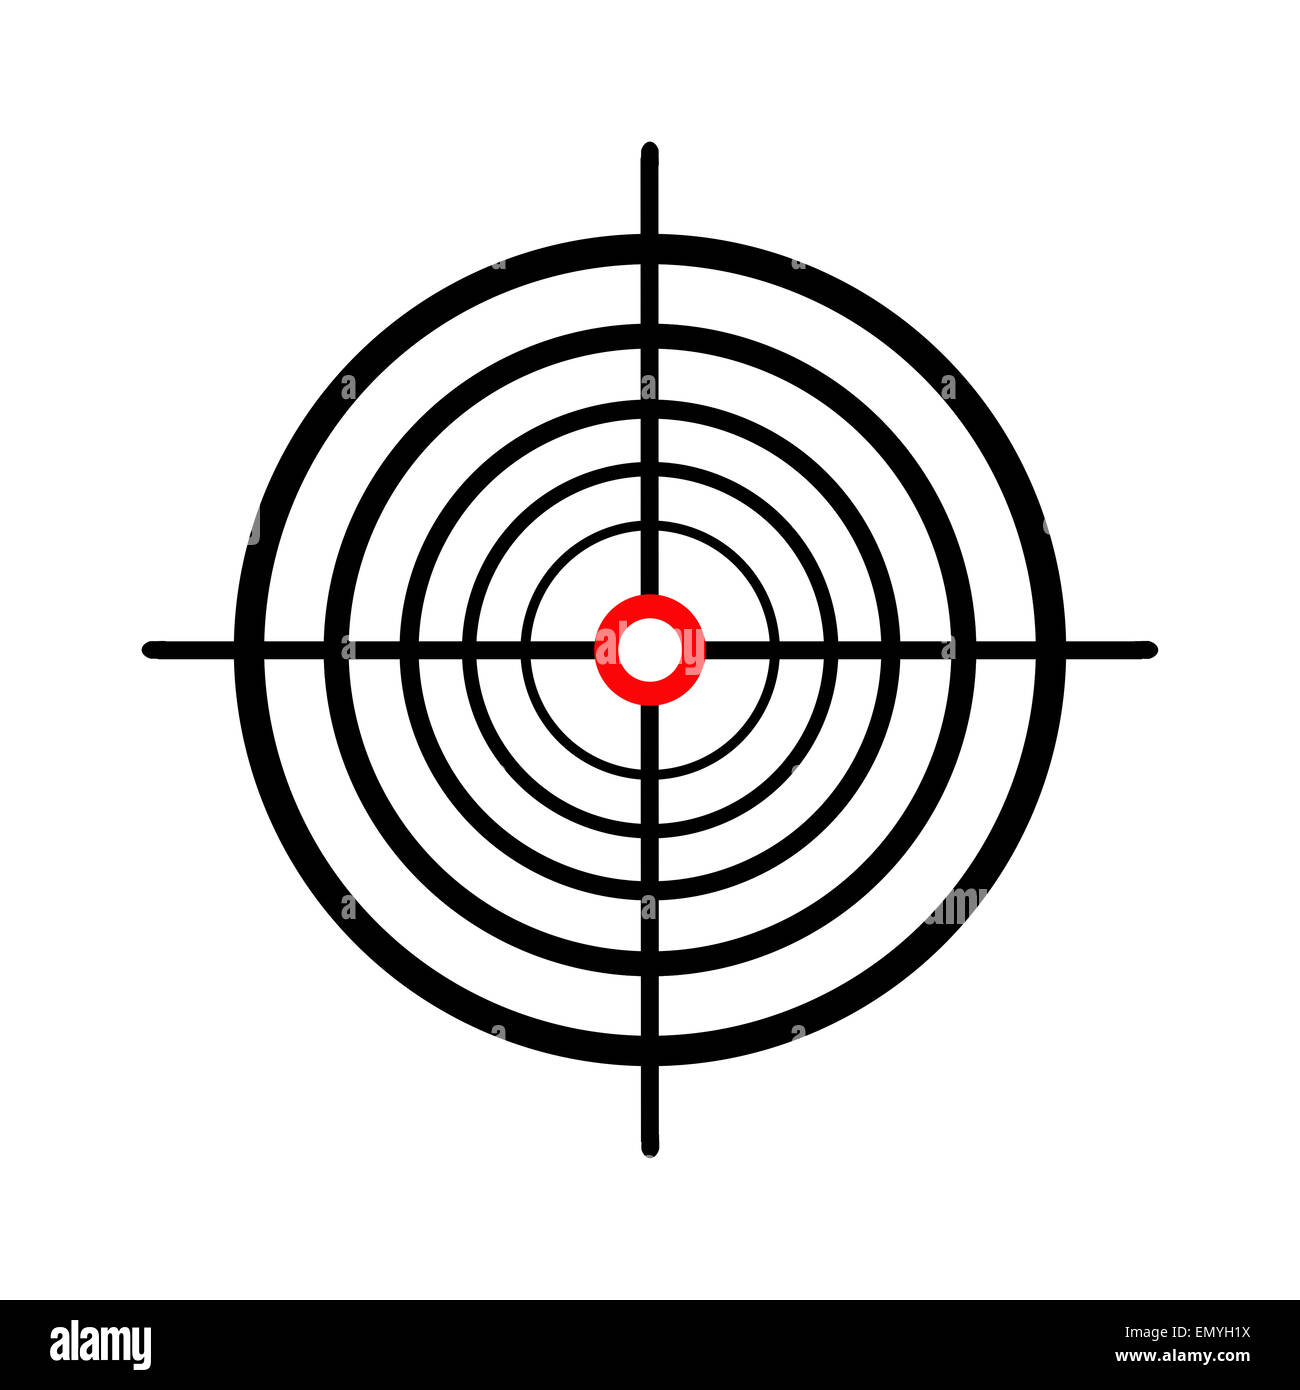 Illustration of a black target sight over white. Stock Photo